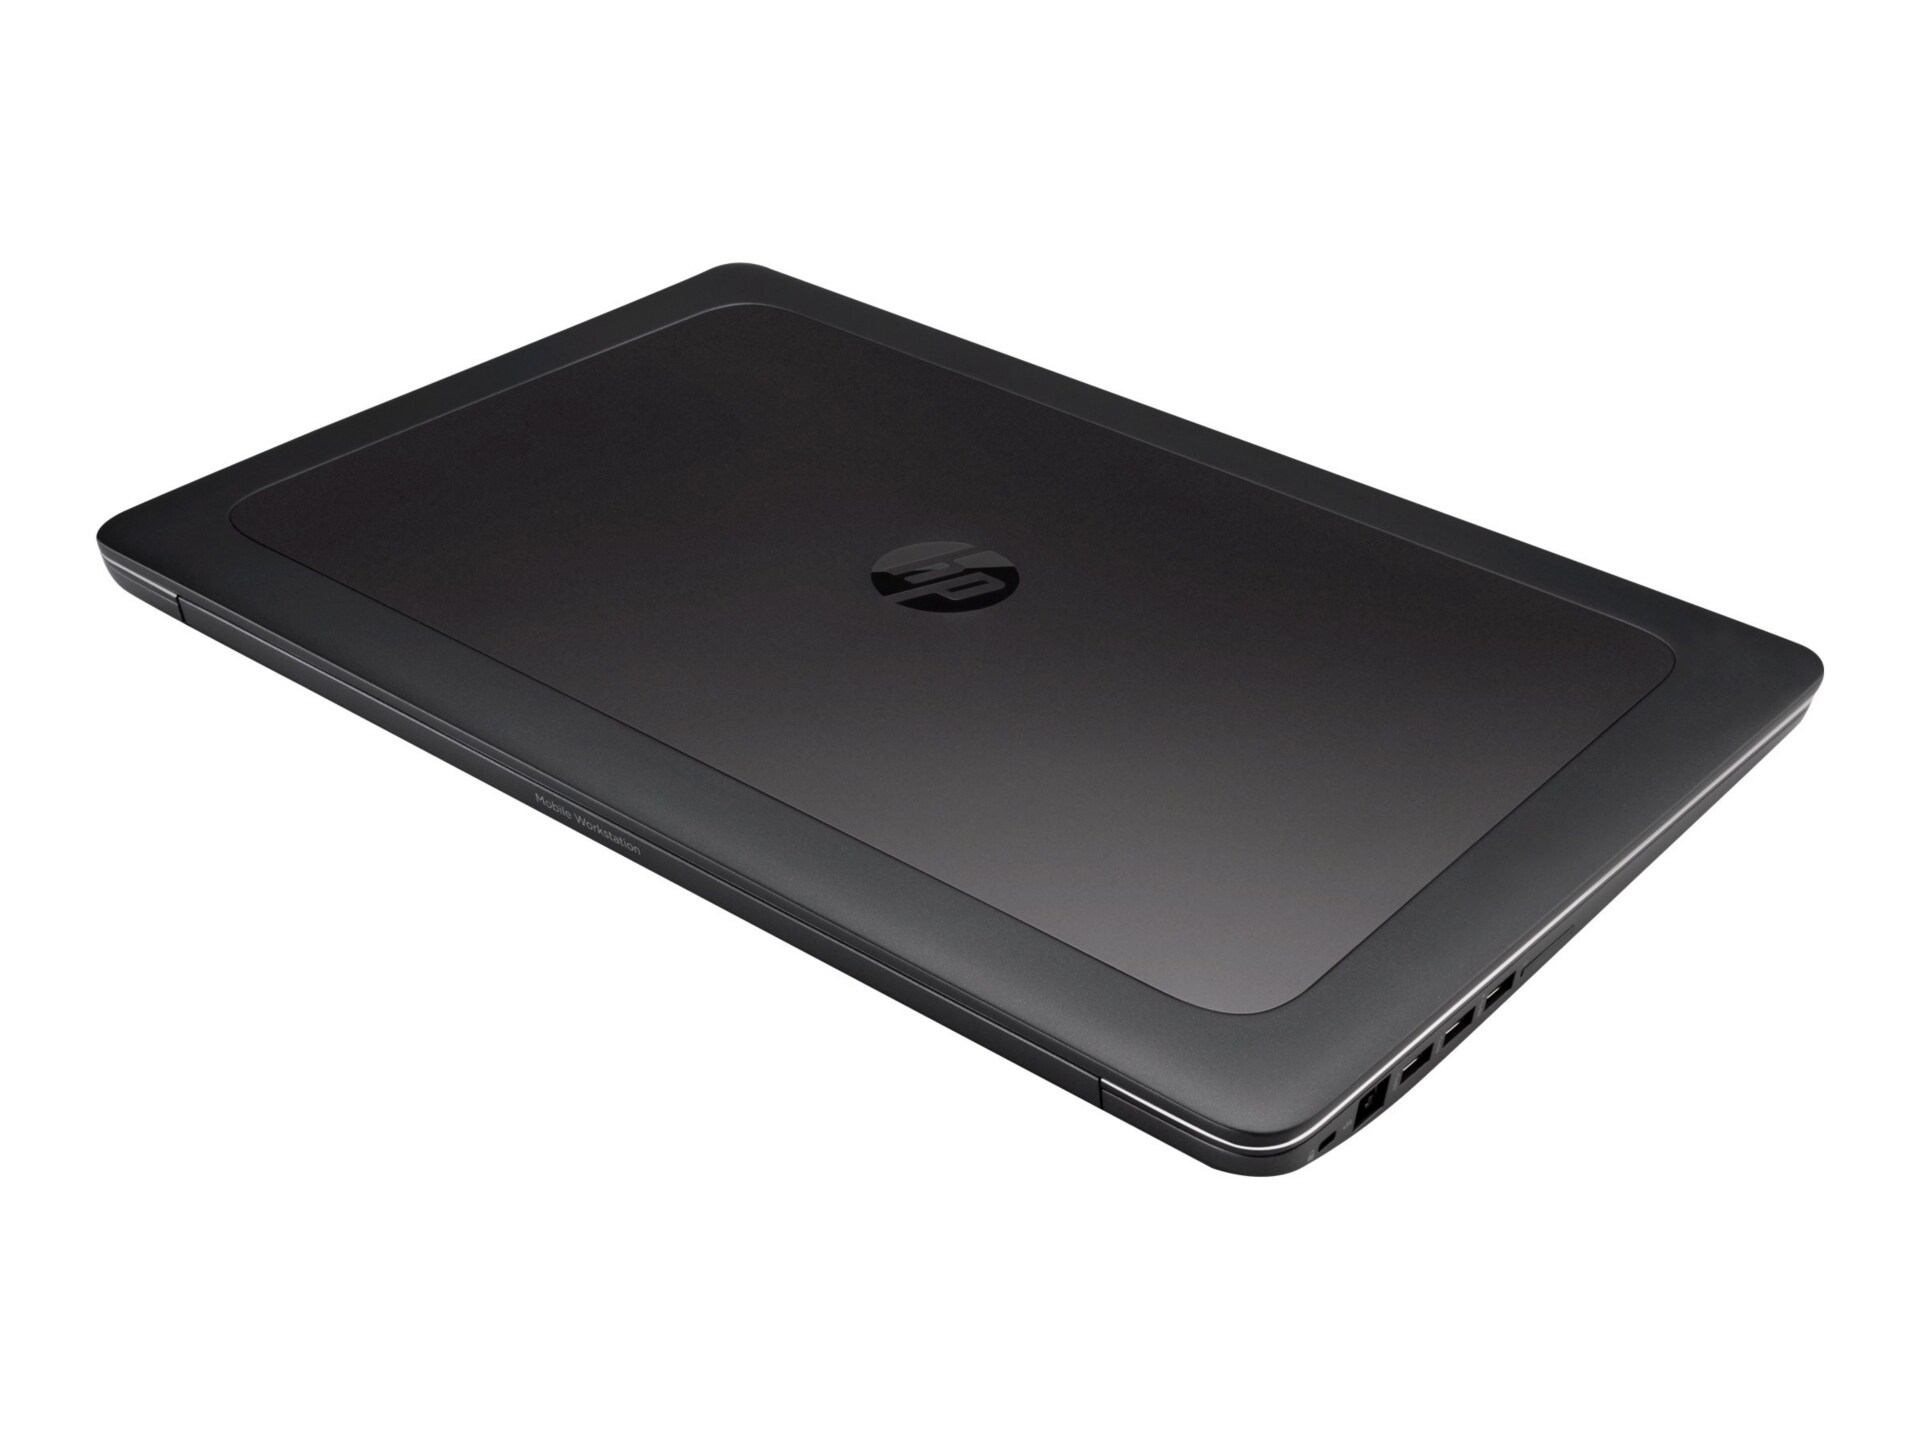 HP ZBook 17 G4 Mobile Workstation - 17.3" - Core i7 7820HQ - 16 GB RAM - 512 GB SSD + 1 TB HDD - QWERTY US